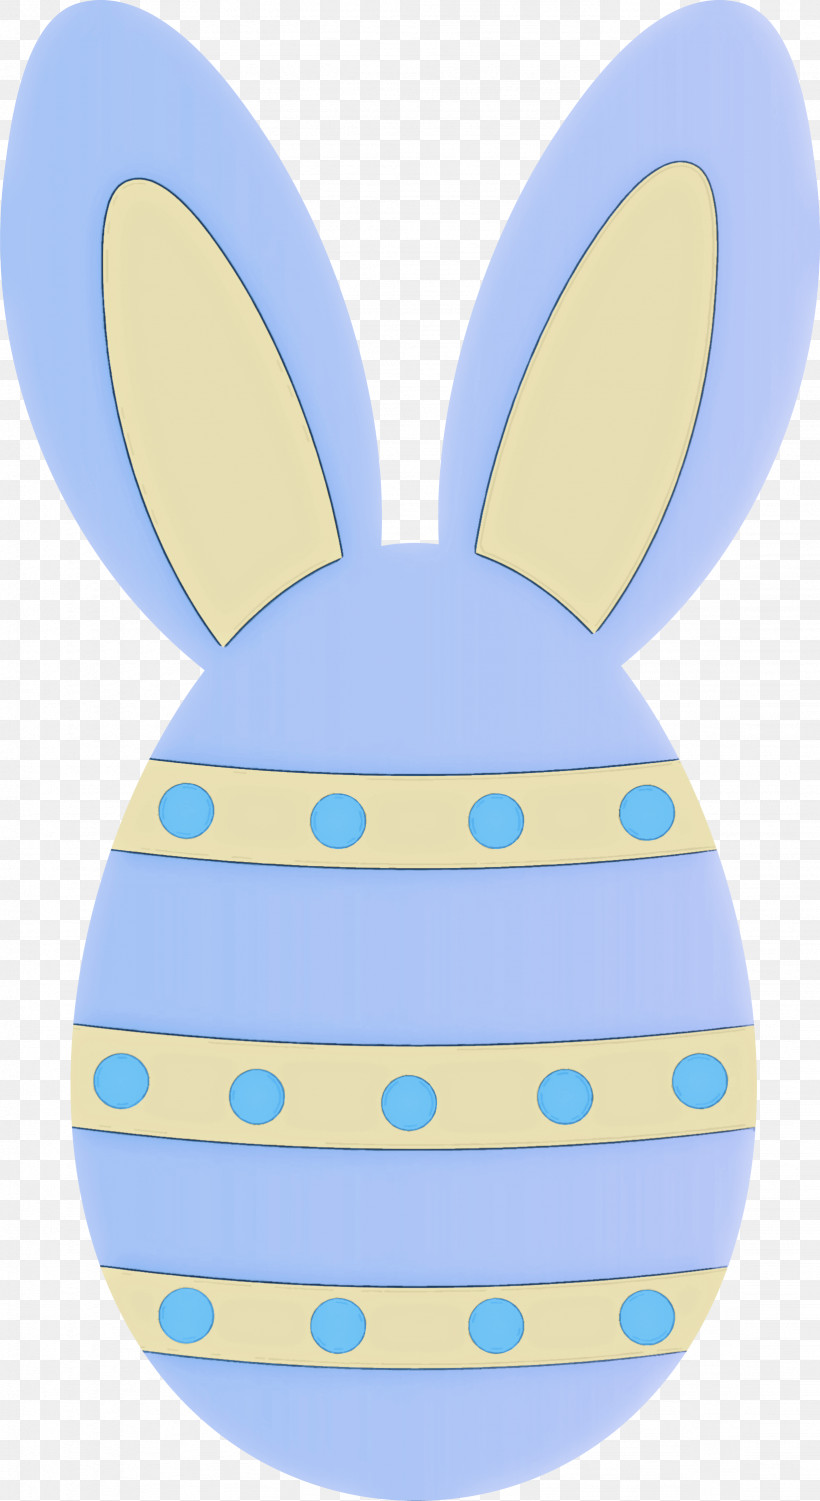 Easter Egg With Bunny Ears, PNG, 1638x3000px, Easter Egg With Bunny Ears, Easter Bunny, Rabbit Download Free